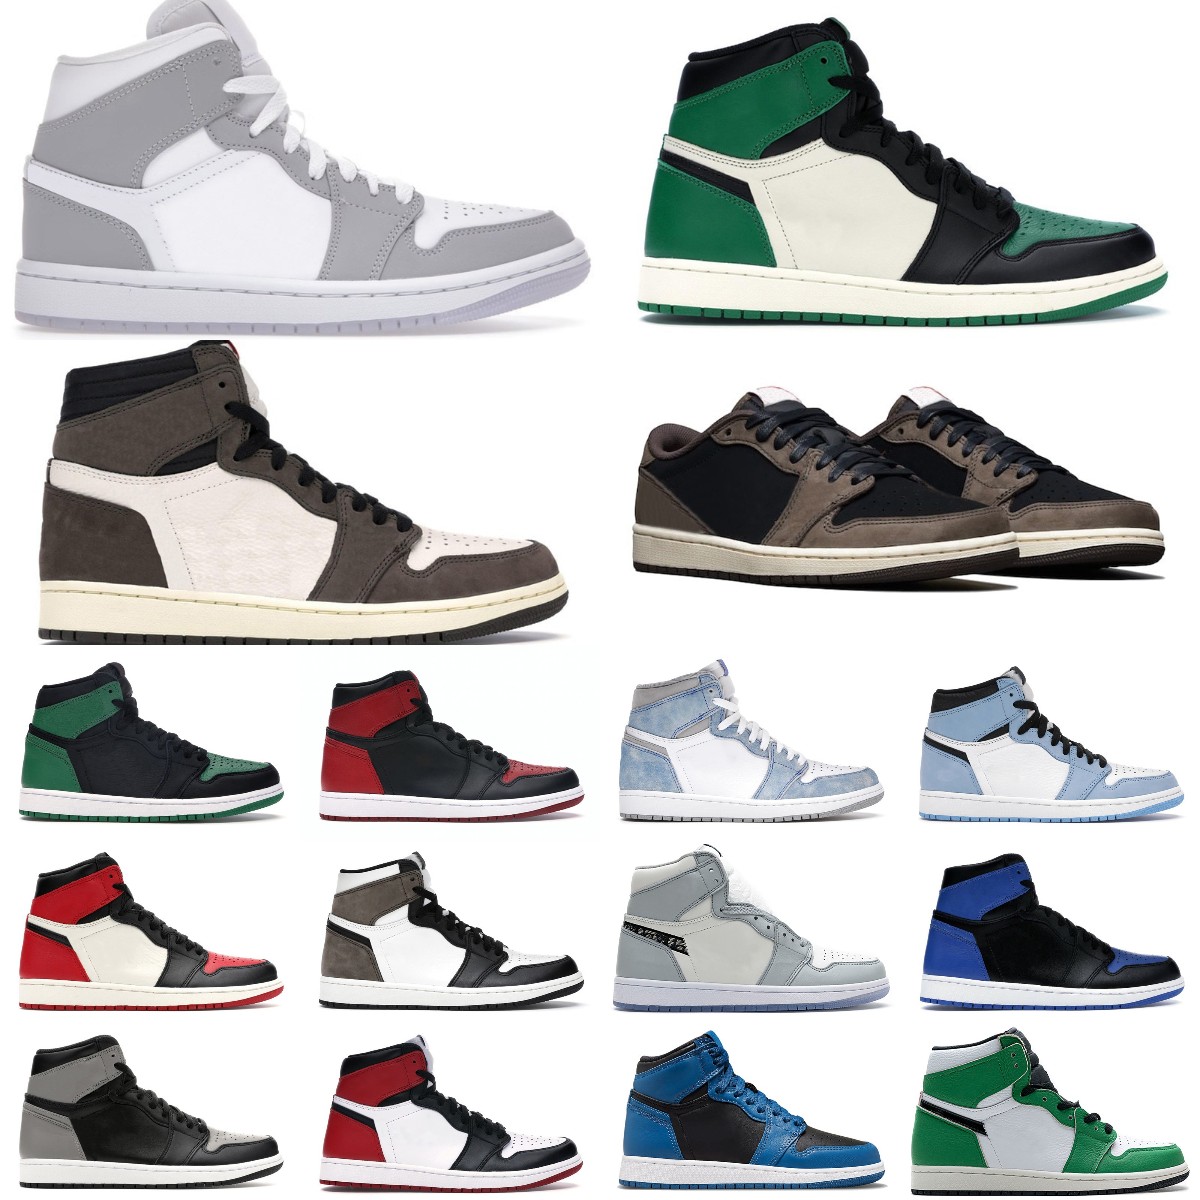 New Og Lost Found 1 Basketball Shoes 1s Fow Reverse Moka Sail Black Starfish Taxi Chicago Bred Patent Gorge Green Mens Trainer Sports Sneakers 36-47